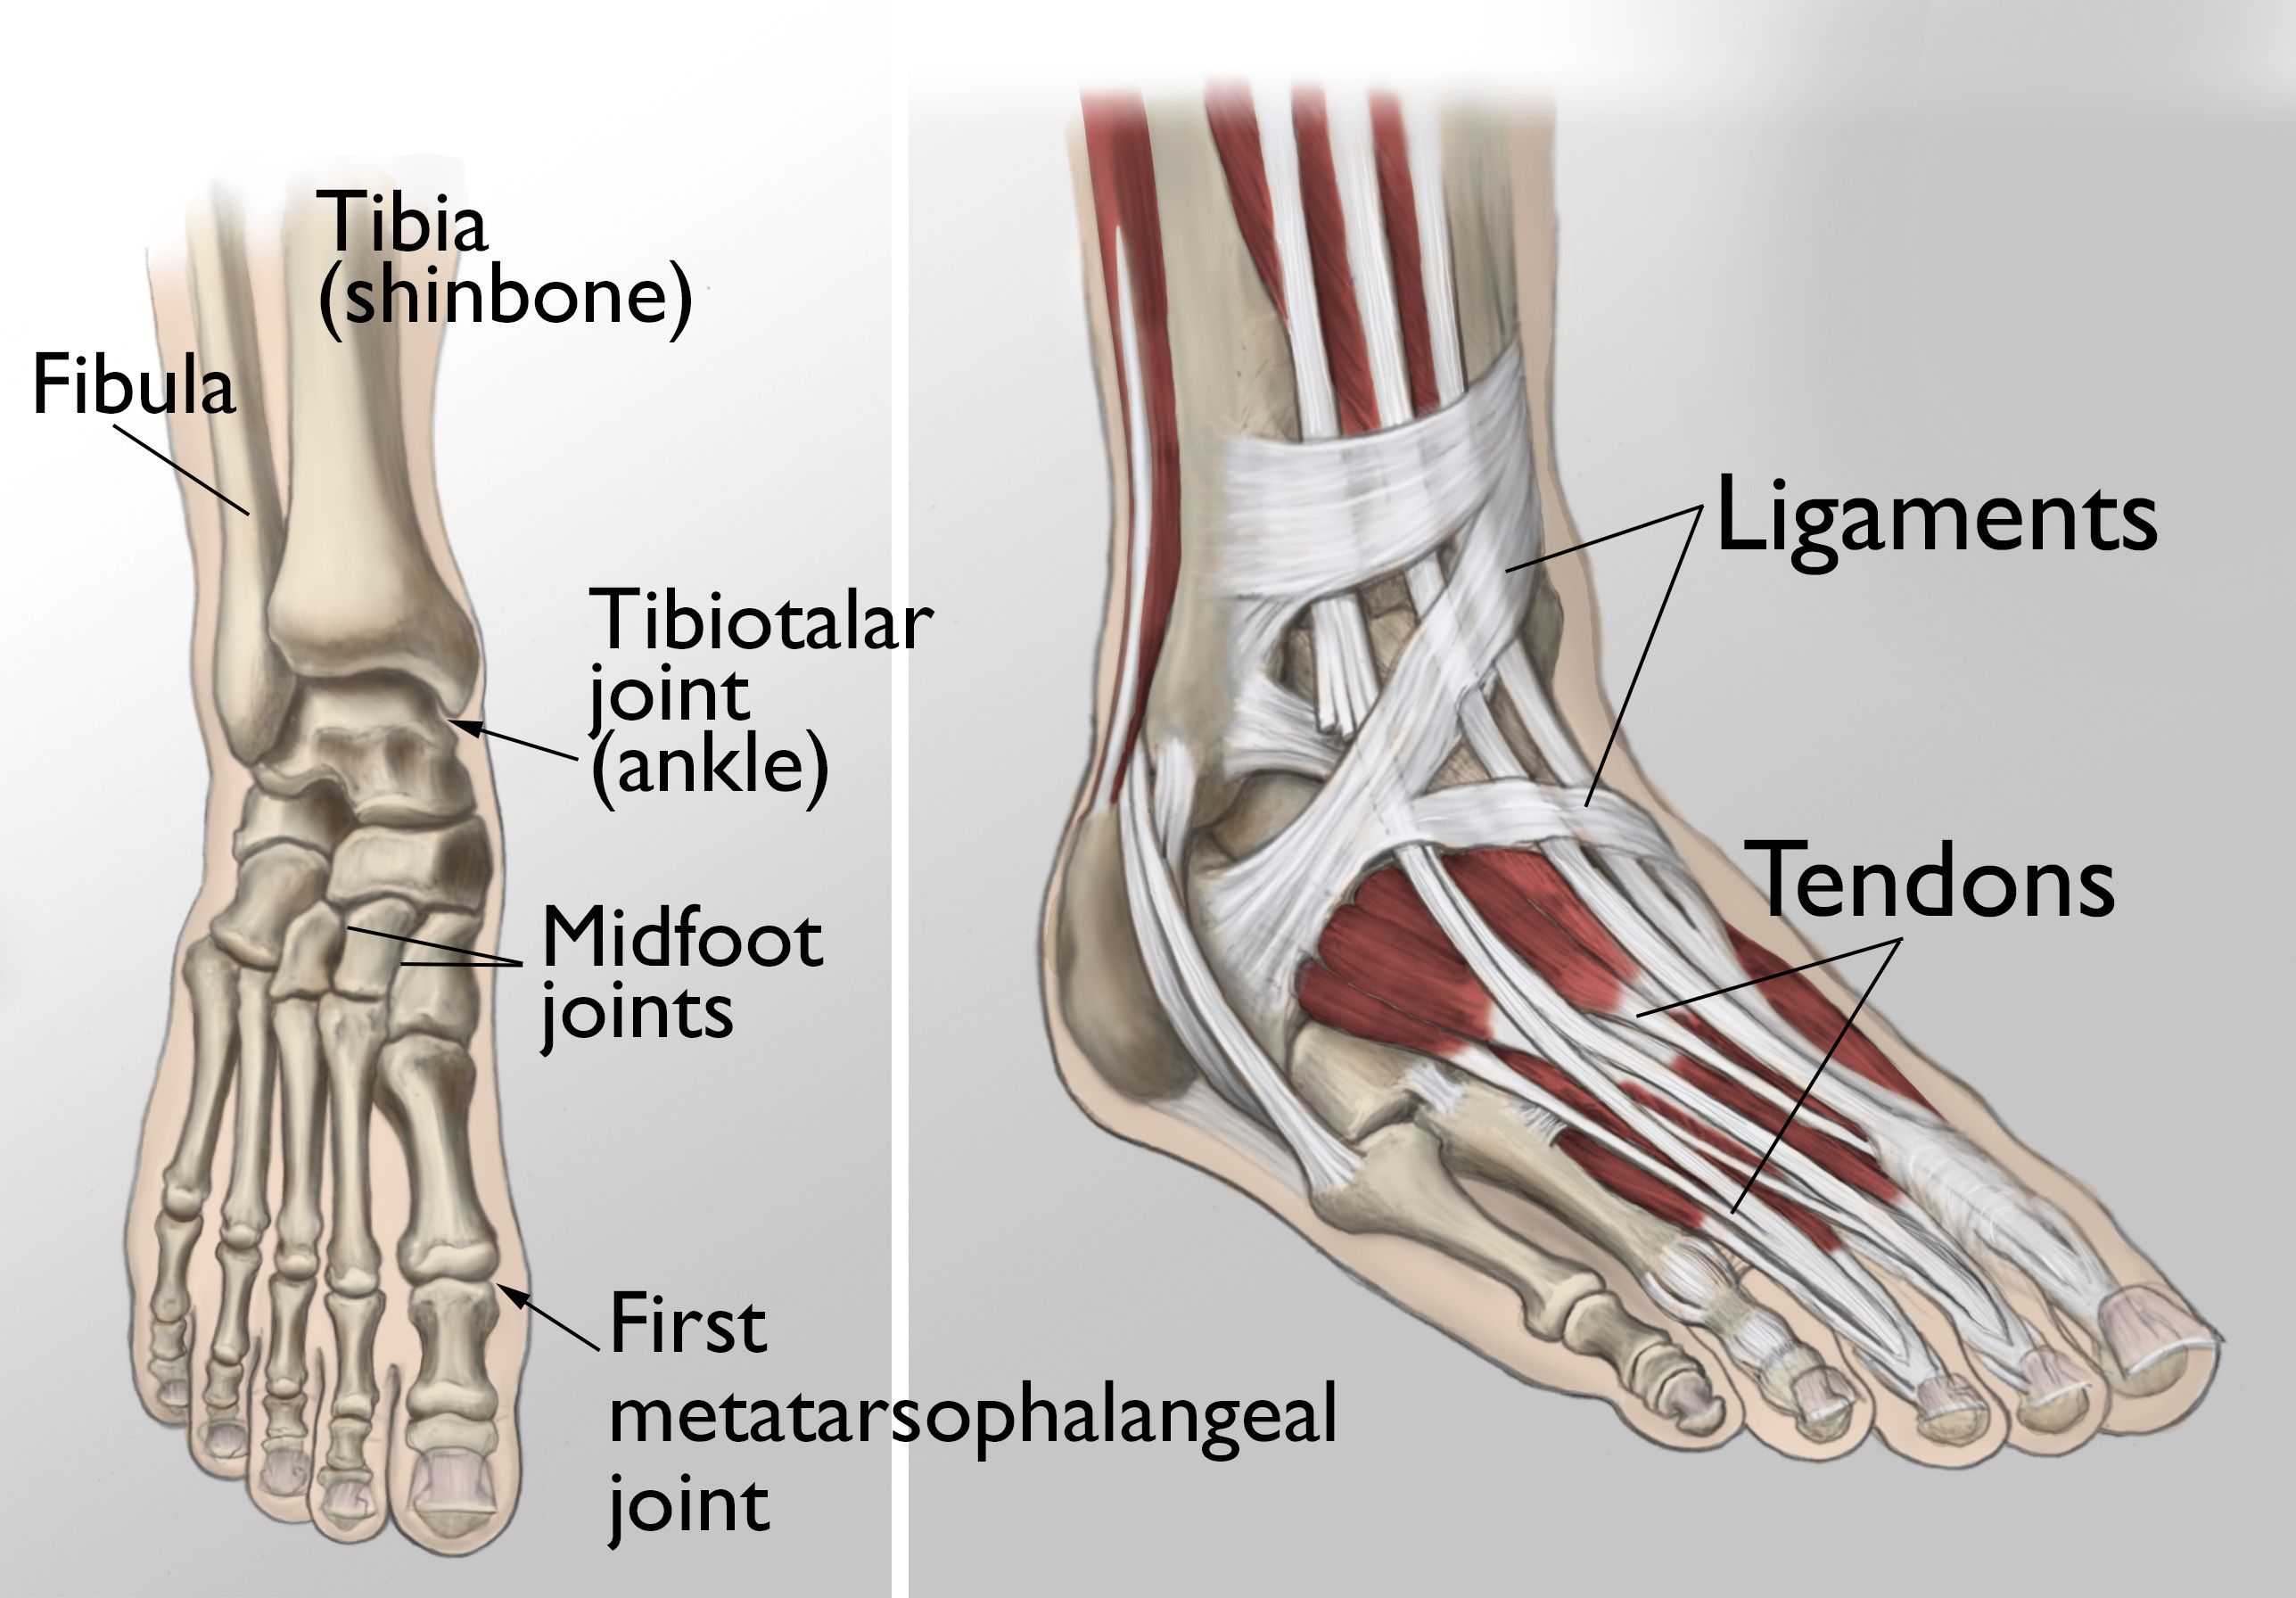  The joints of the ankle, midfoot, and big toe